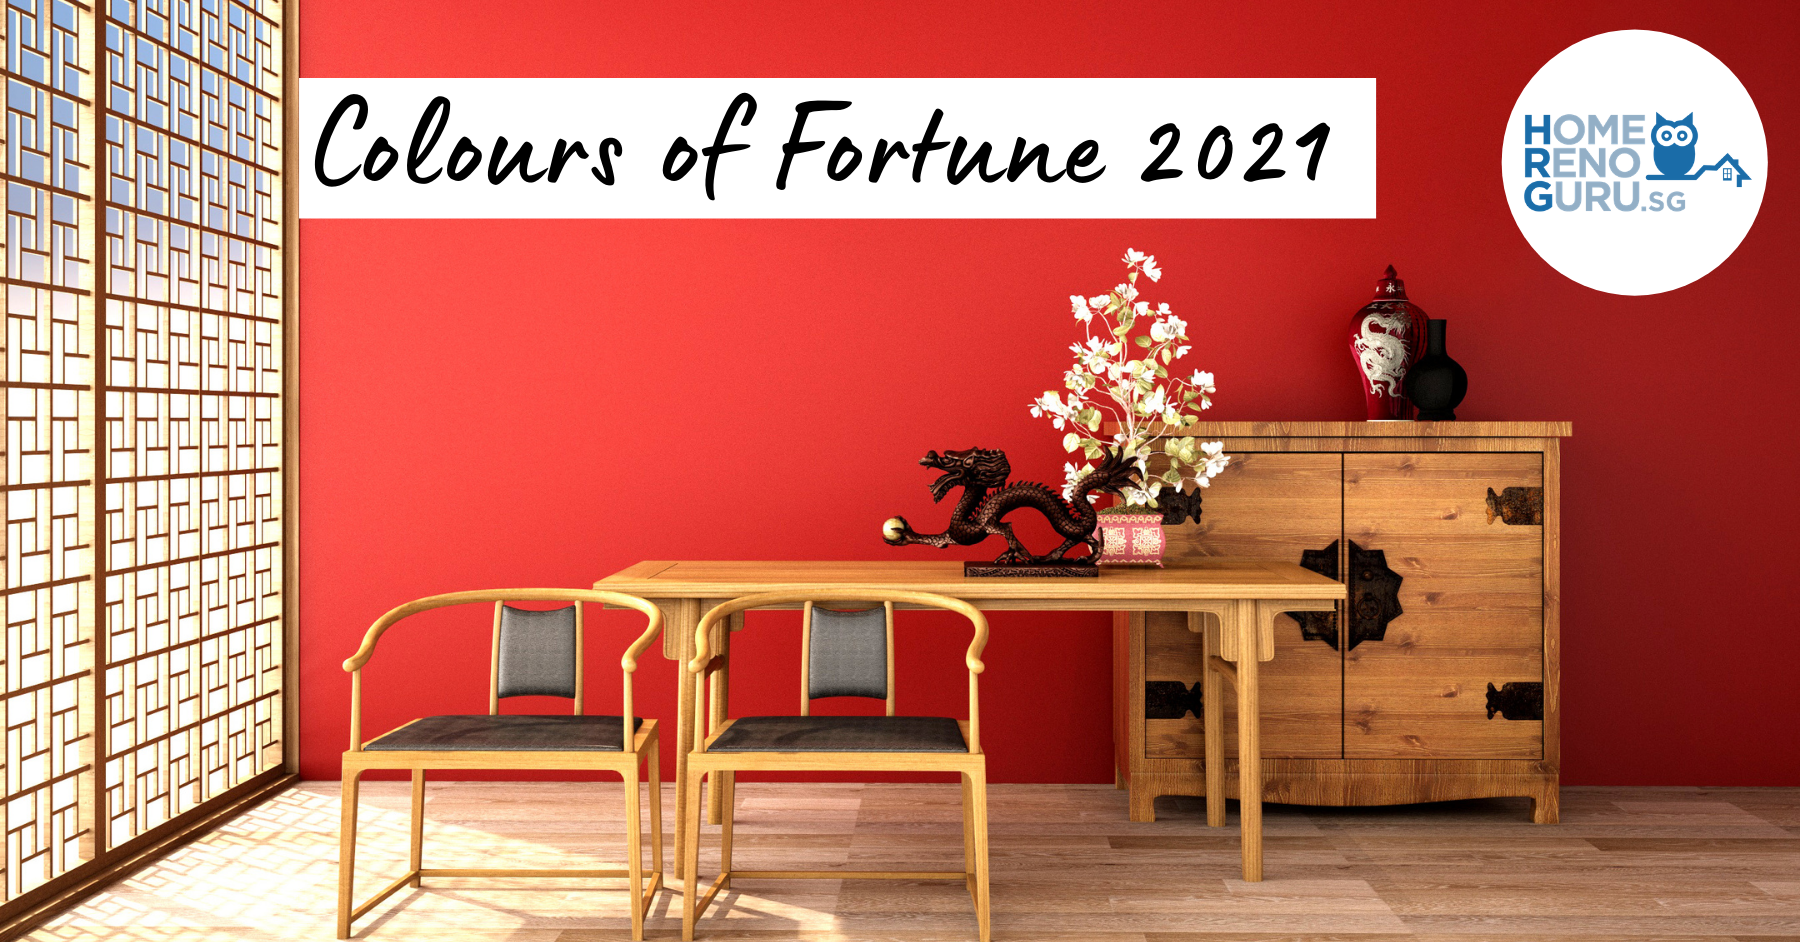 Colours of Fortune 2021